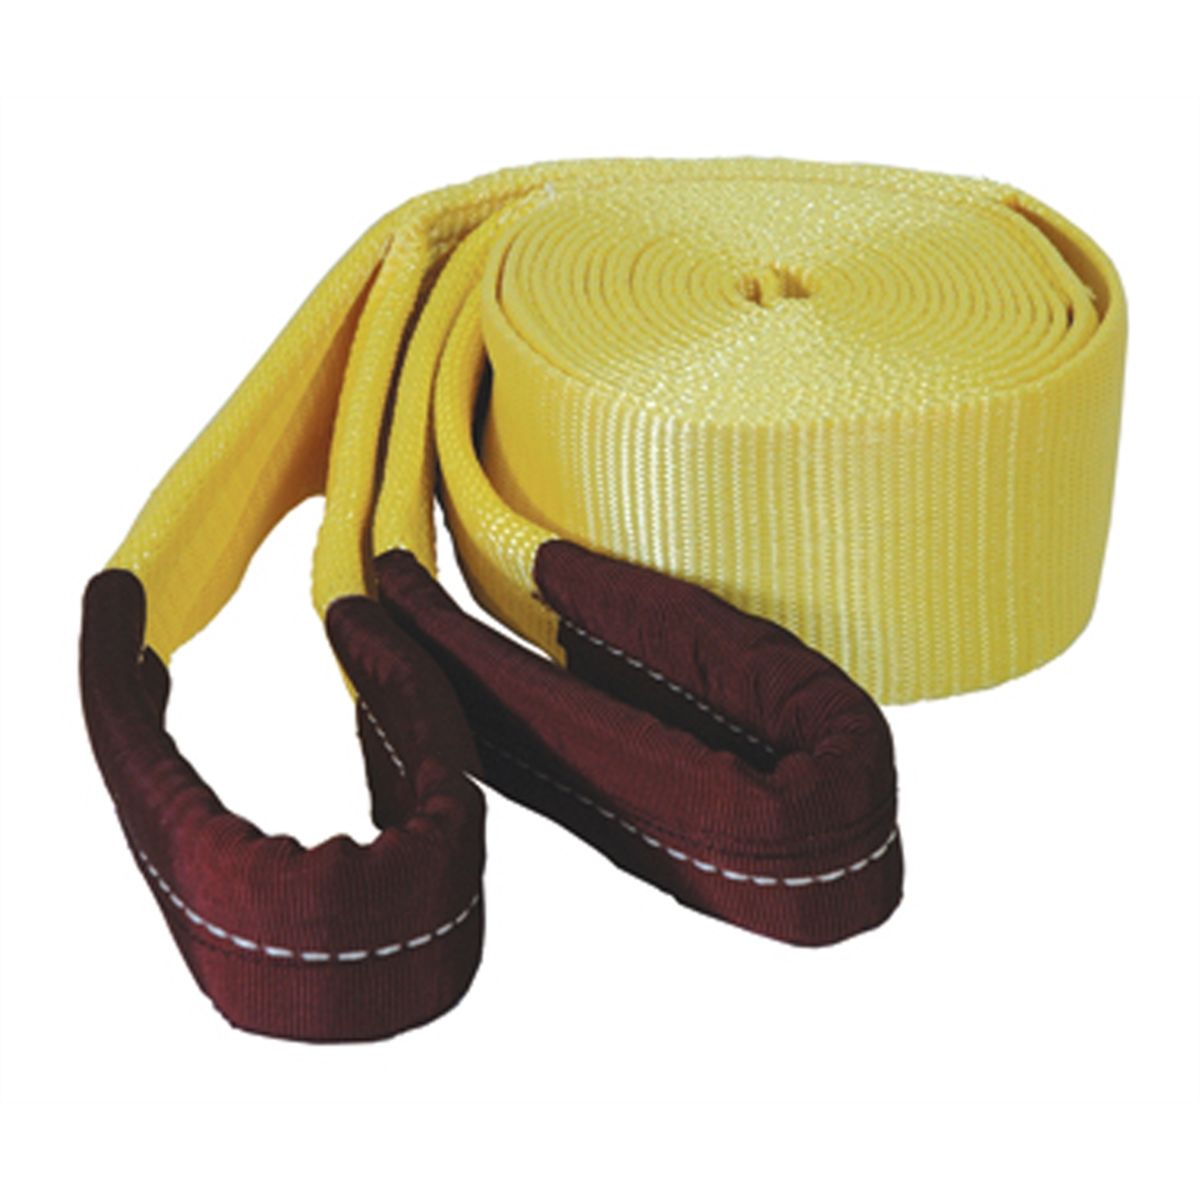 Tow Strap w/ Looped Ends - 3 In x 30 Ft - 30,000